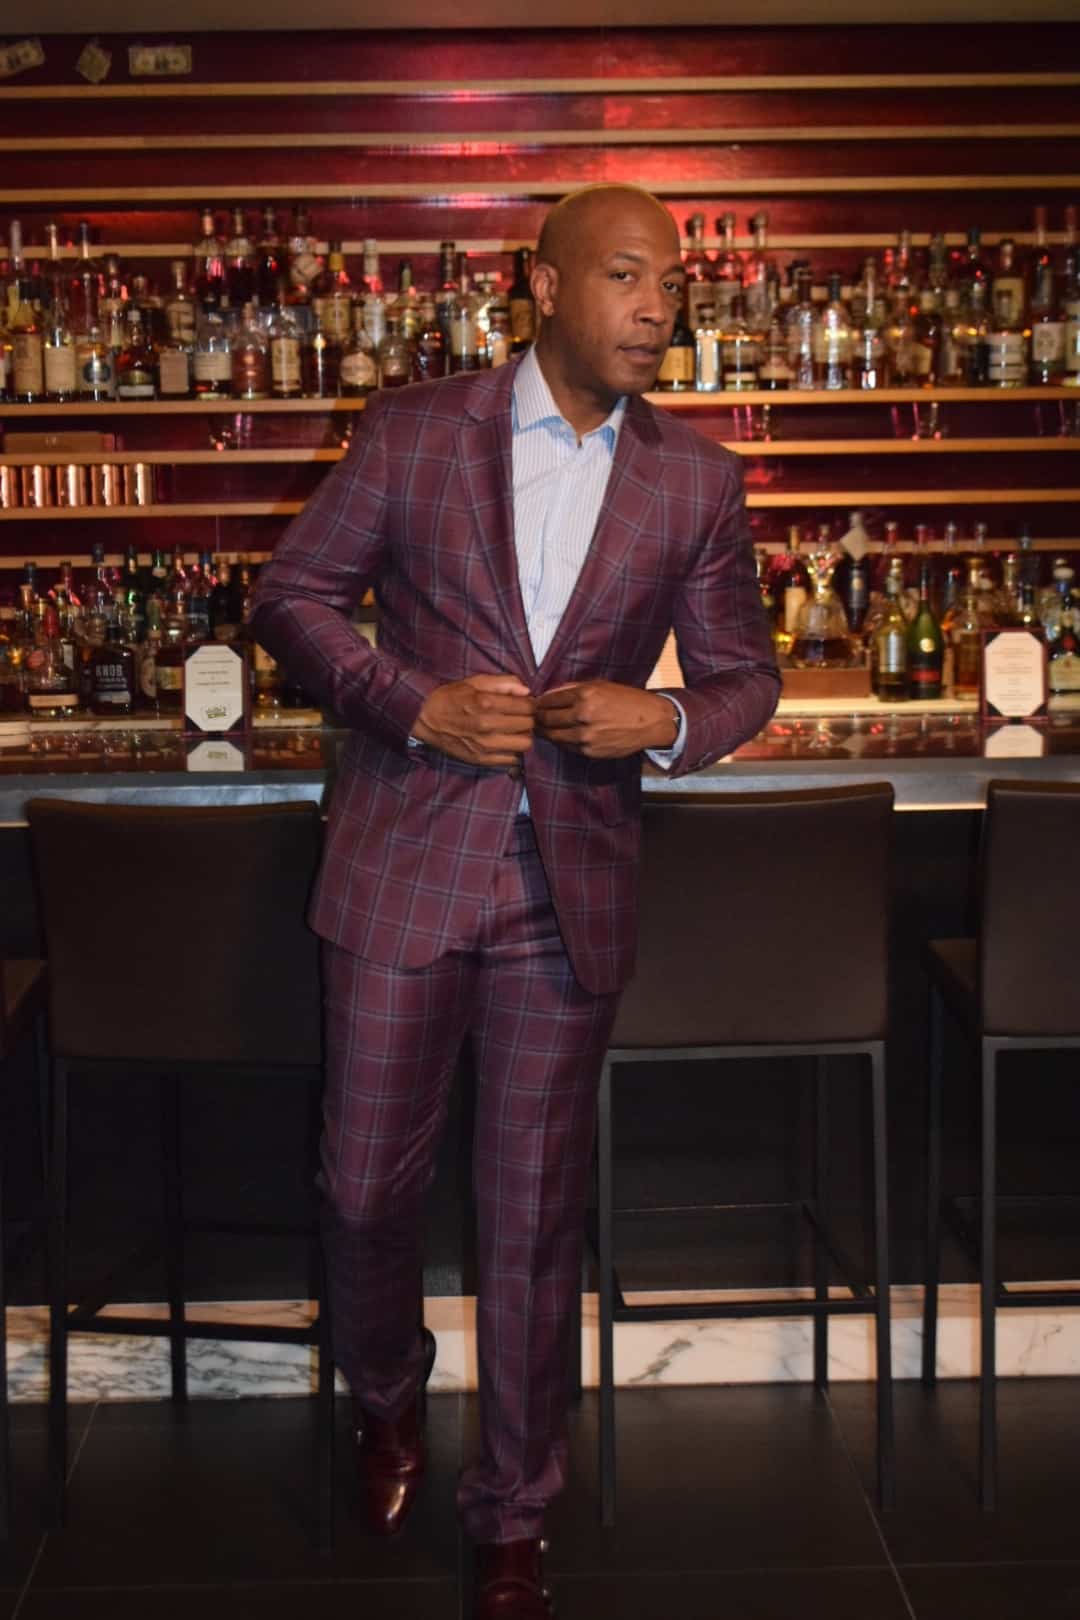 Barnette Holston wearing plaid wine color suit and striped button down